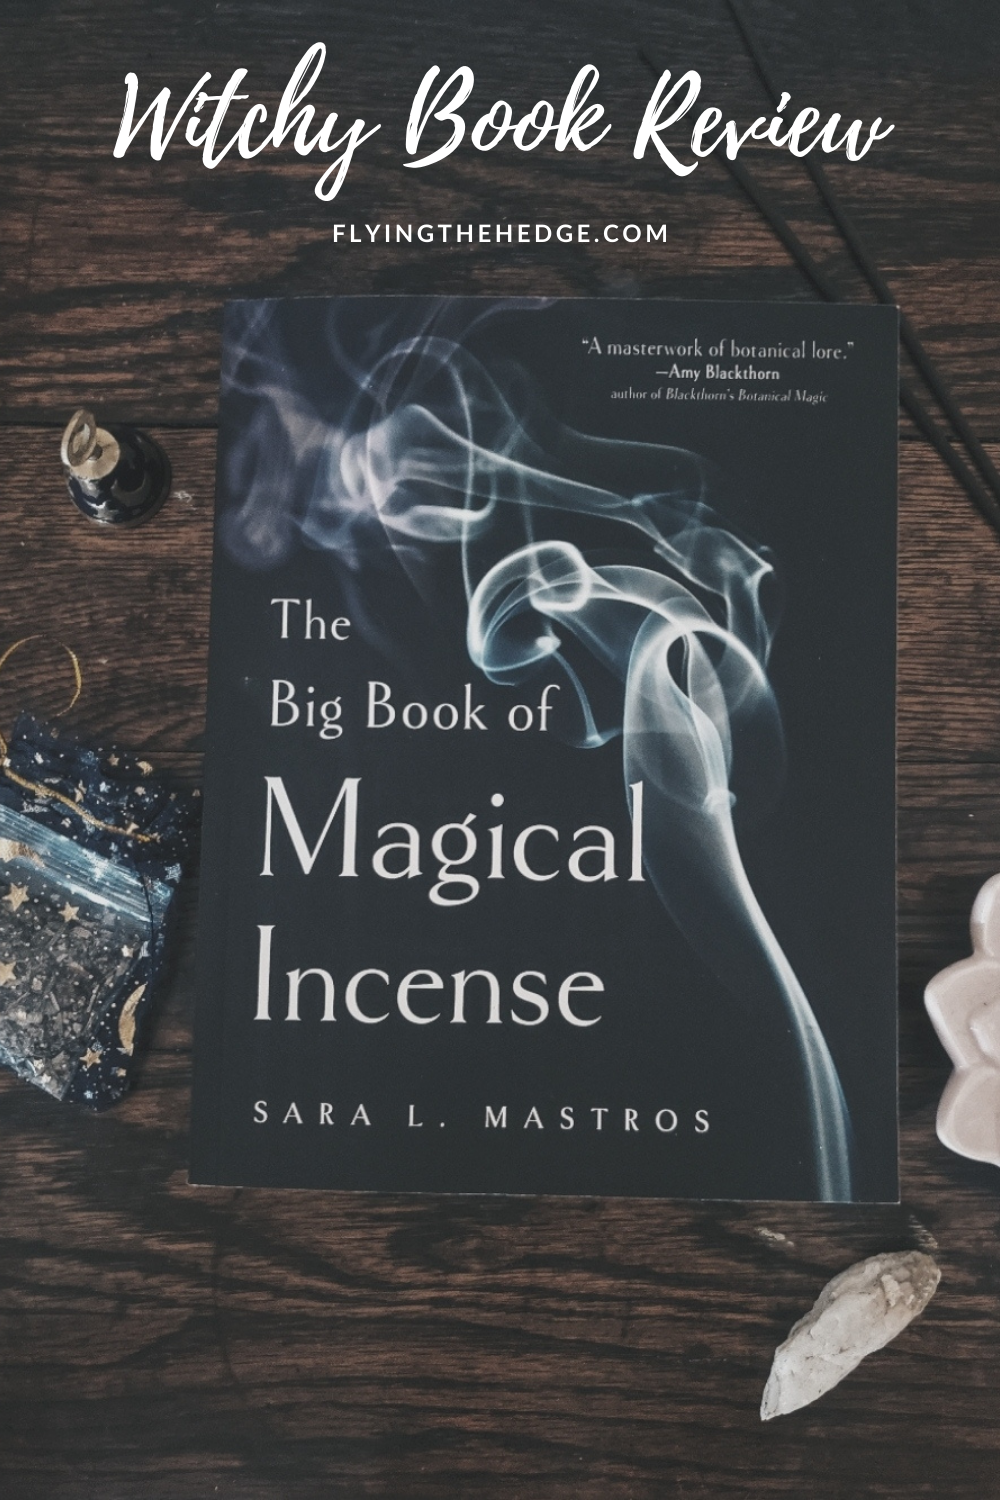 incense, folk lore, folk magic, book review, witch, witchcraft, wicca, wiccan, pagan, neopagan, witchy reads, witch book